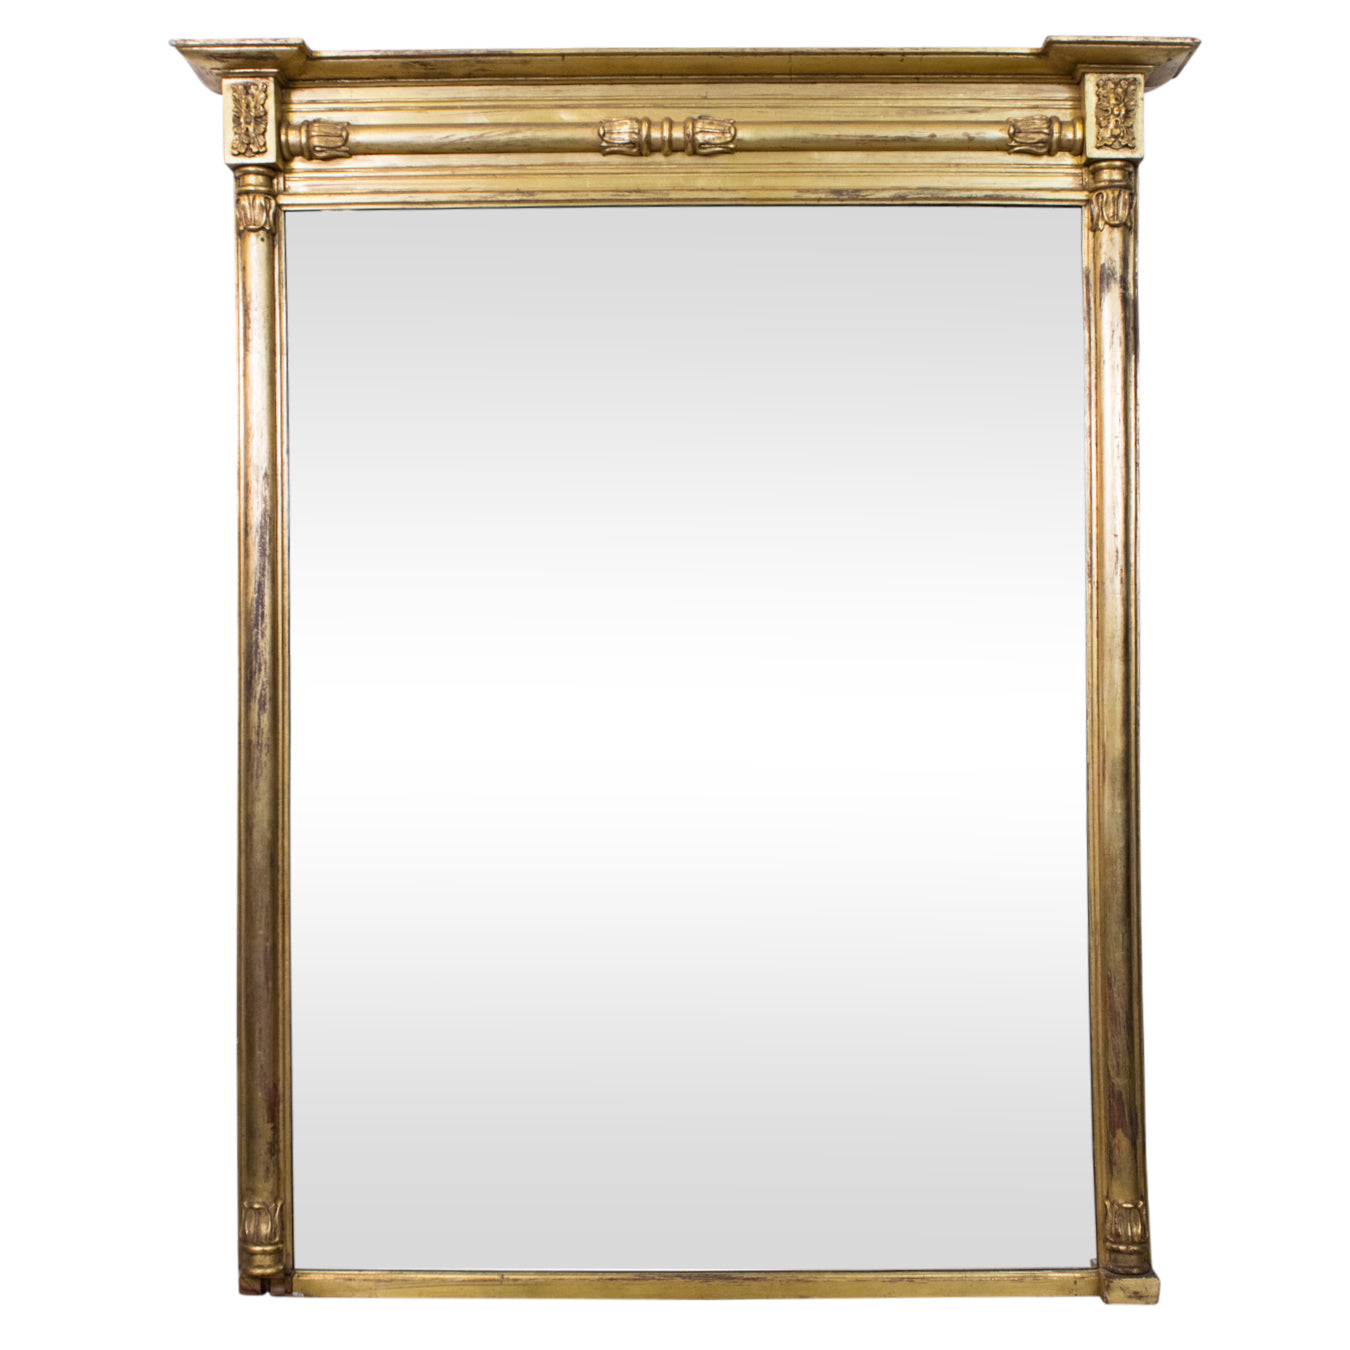 A Regency Style Giltwood and Gesso Overmantel Mirror